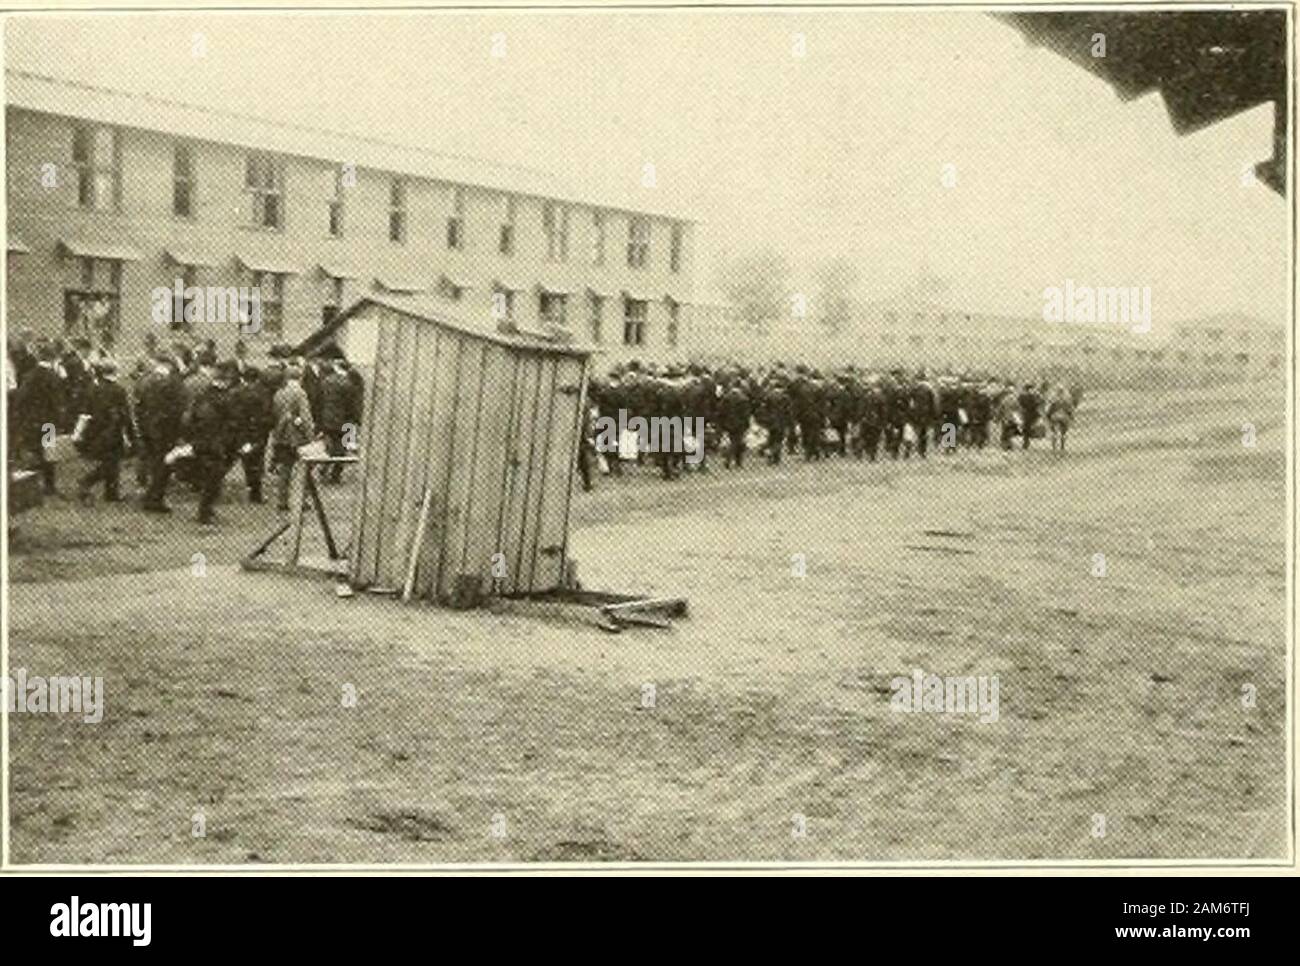 331st field artillery, United States army, 1917-1919 . Recruits passing D Barrackspictured fanciful scenes of the future,would report for service with the 33] ind speculated as to the types of men who 1 IF EARLY TRAINING It was September 8th whenthe first quota of men ar-rived. The men were drawnfrom the State of Wisconsin,but various counties wereassigned to the different or-ganizations. Battery Awas made up of- men fromFond du Lac County; Battery!B of men from Dodge andOutagamie Counties; BatteryC from Columbia andWashington Counties; Battery D from Adams, Sauk, Wau-shara and Marquette Cotin Stock Photo